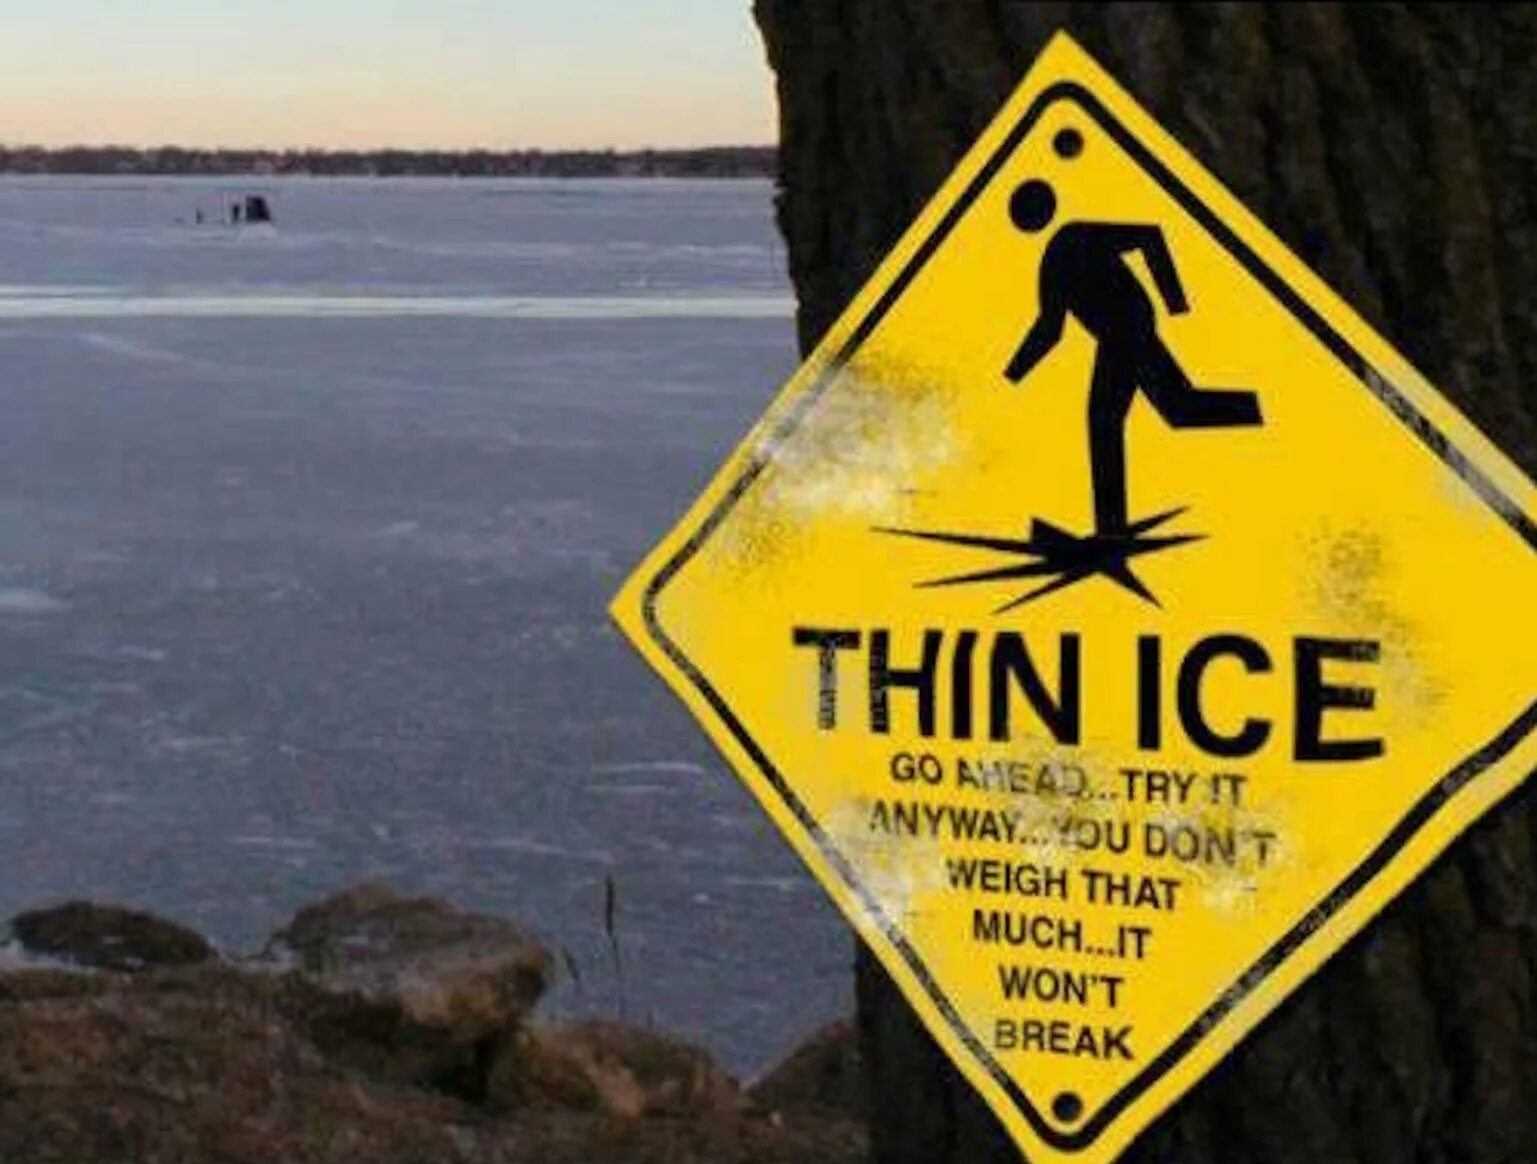 Thin Ice. Funny signs. No funny знак. Funny Road signs. You re starting to look really weird